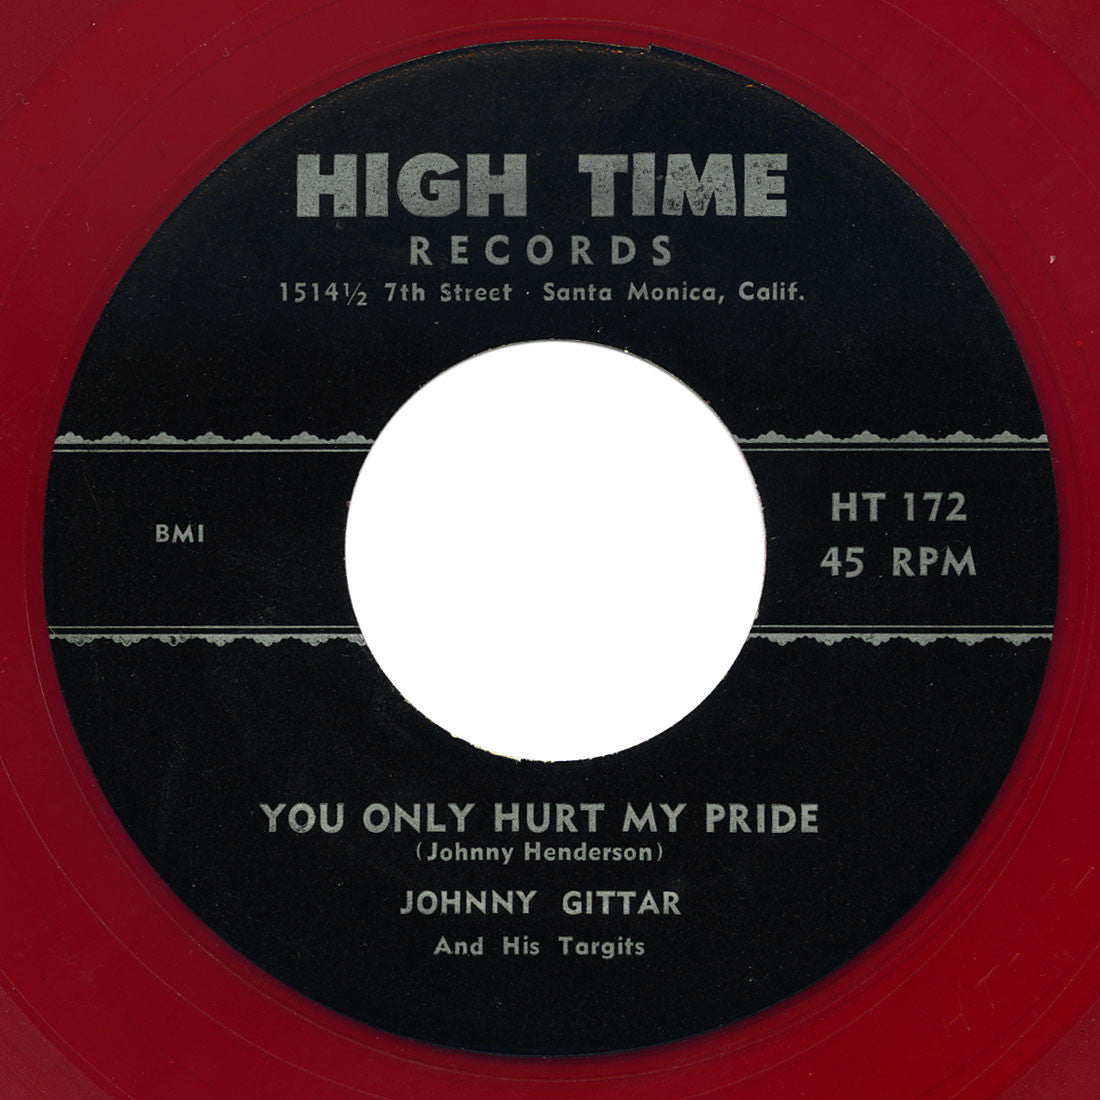 Johnny Gittar and his Targits - San Antonio Boogie / You Only Hurt My Pride - High Time